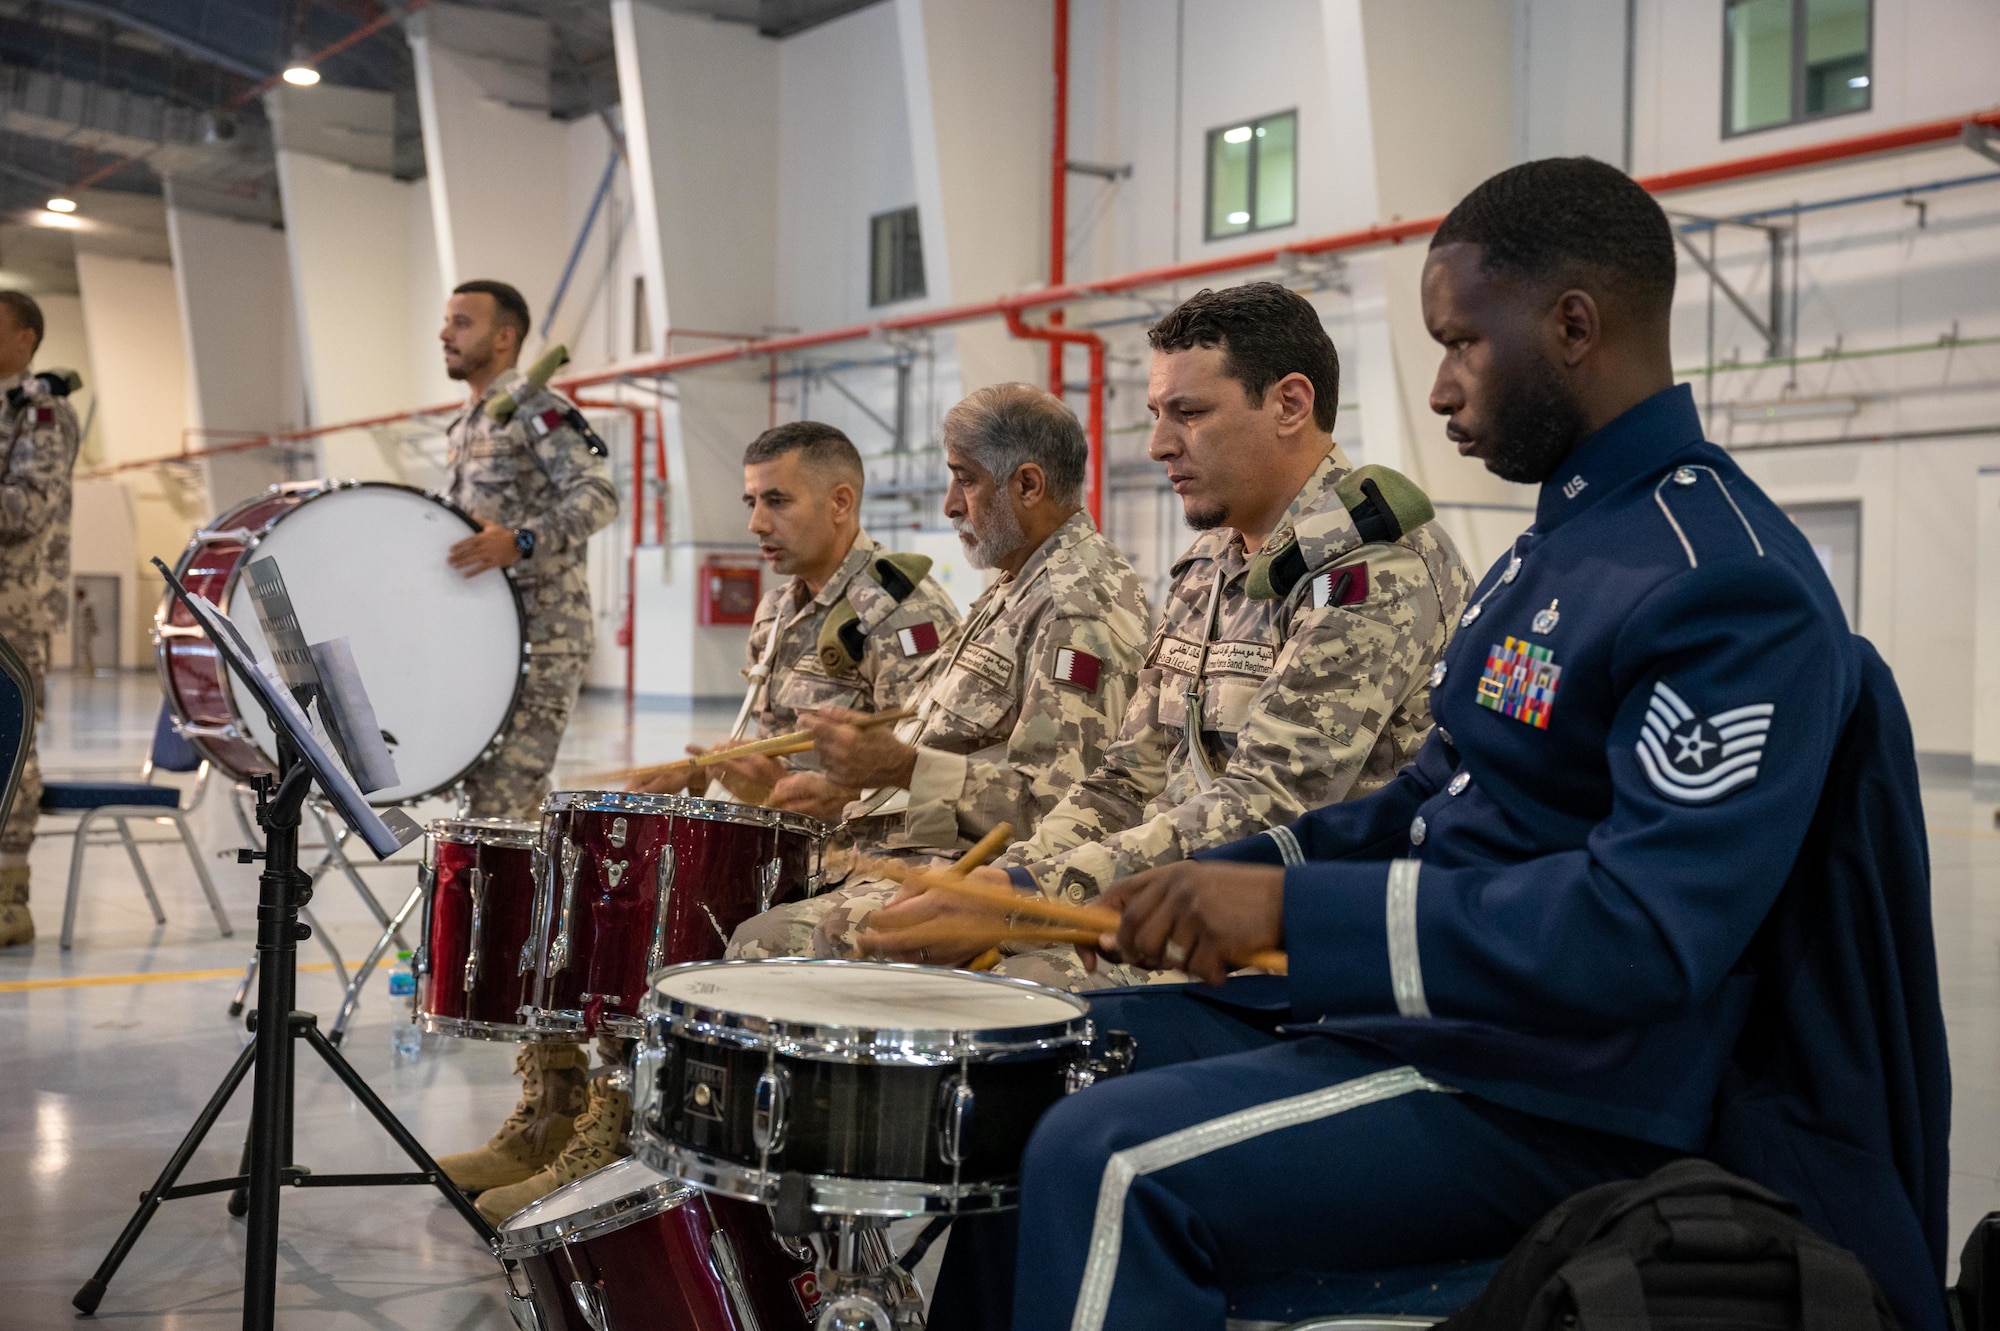 Qatari Emiri Air Force and United States Air Force Central band members perform a musical piece on percussion instruments during Lt. Gen. Derek France's change of command ceremony at Al Udeid Air Base, Qatar, April 18, 2024. AFCENT, in concert with coalition, joint, and interagency partners, delivers decisive air, space and cyberspace capabilities for CENTCOM, allied nations and the U.S. (U.S. Air Force photo)